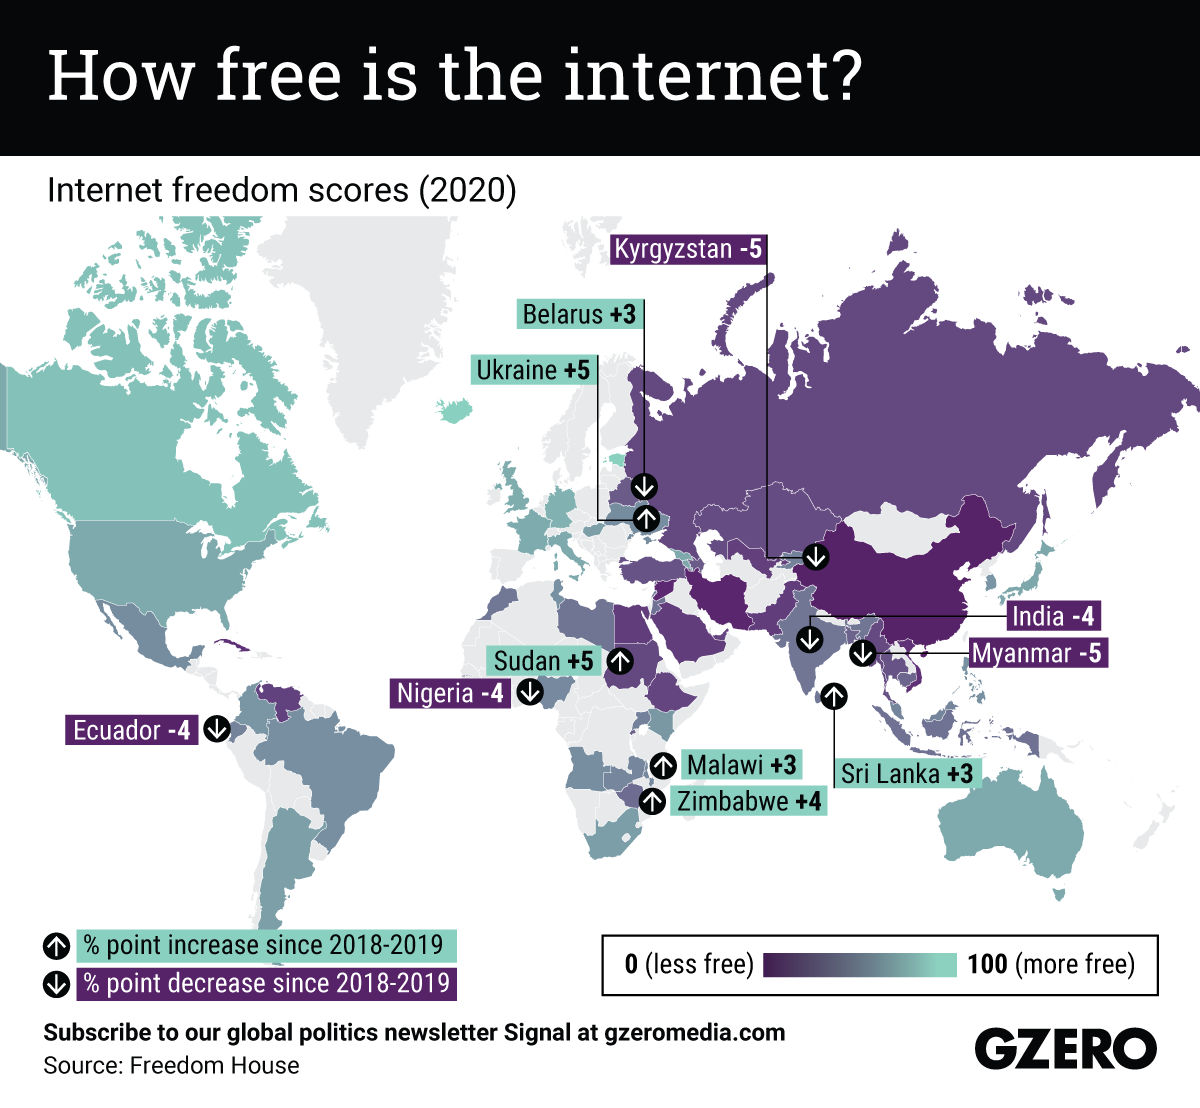 The Graphic Truth: How free is the internet?